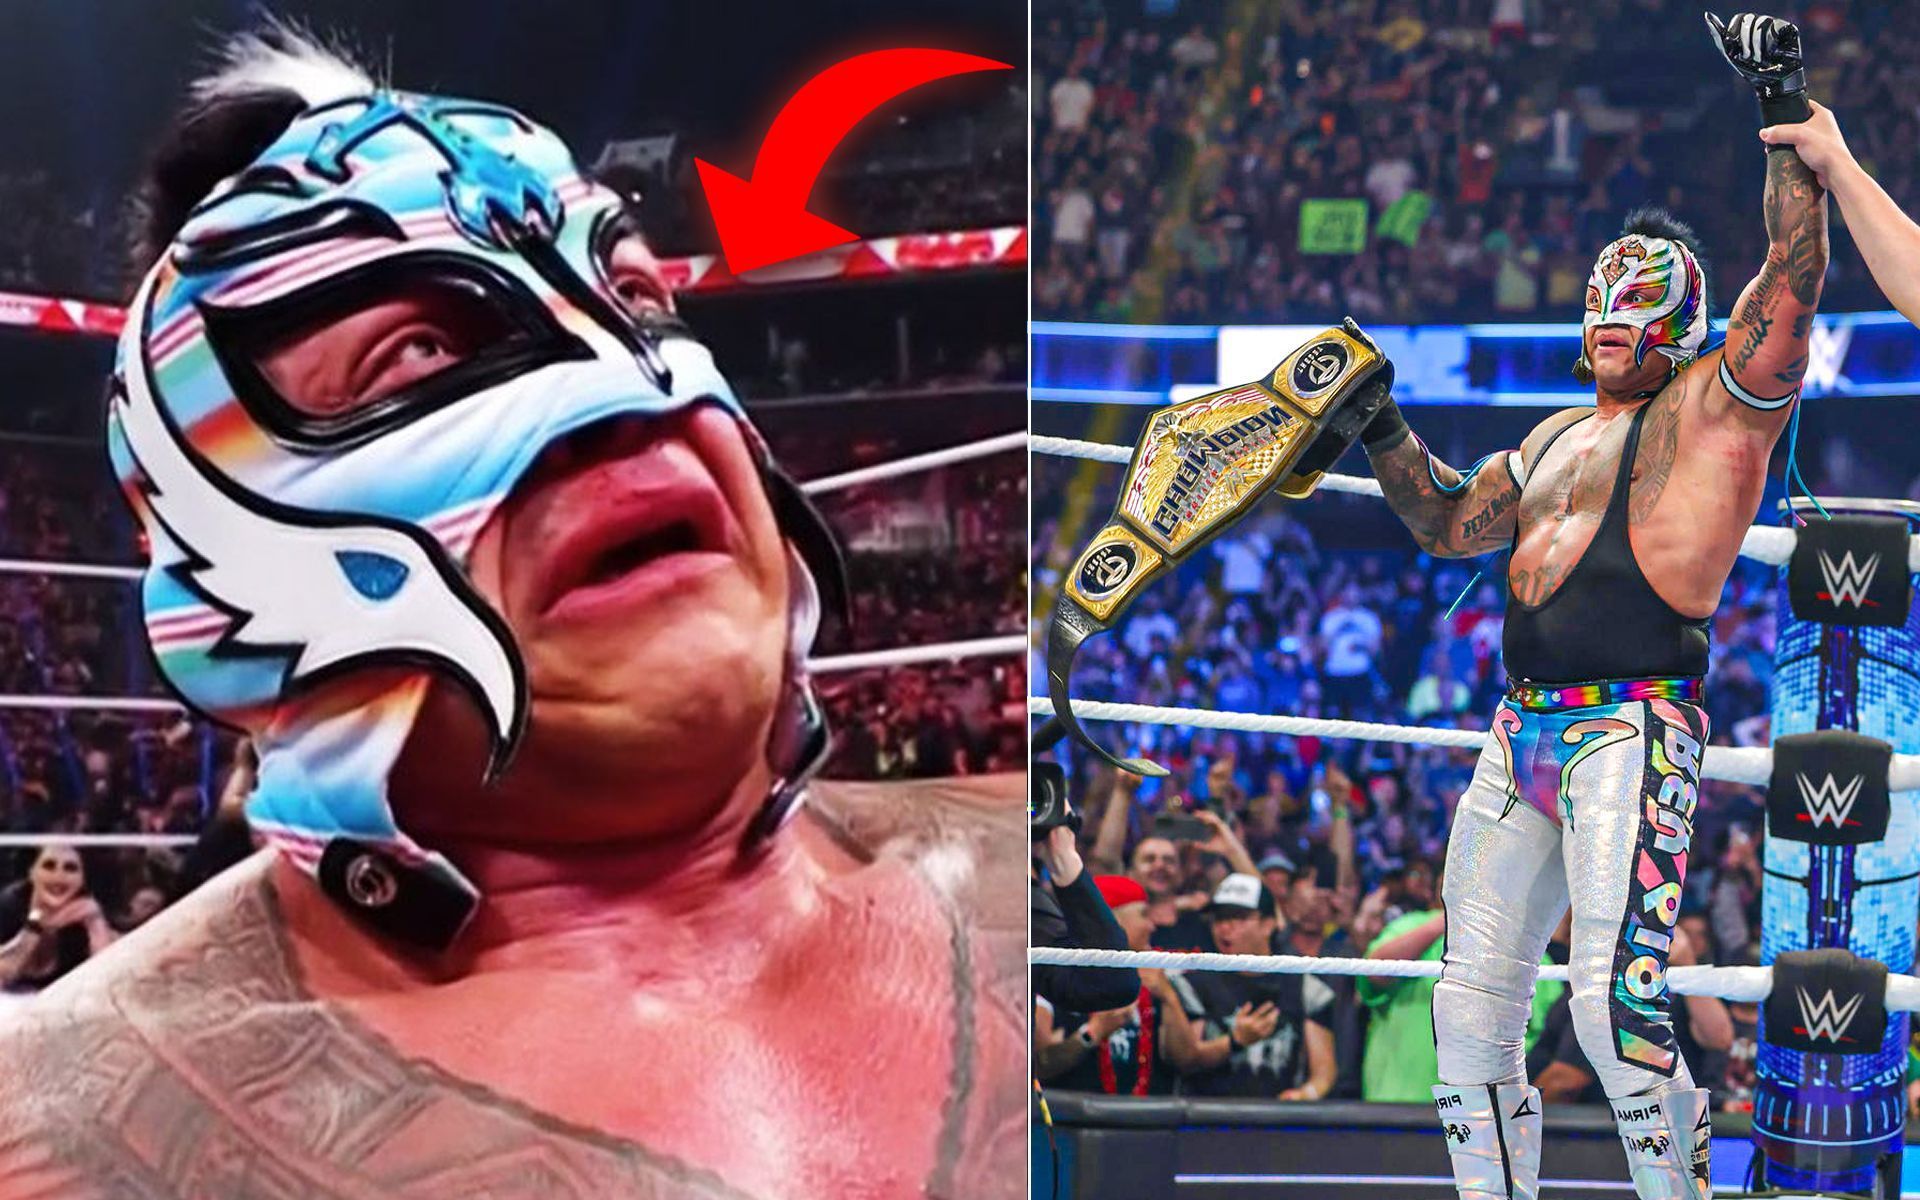 Rey Mysterio wins his first singles title in 1355 days